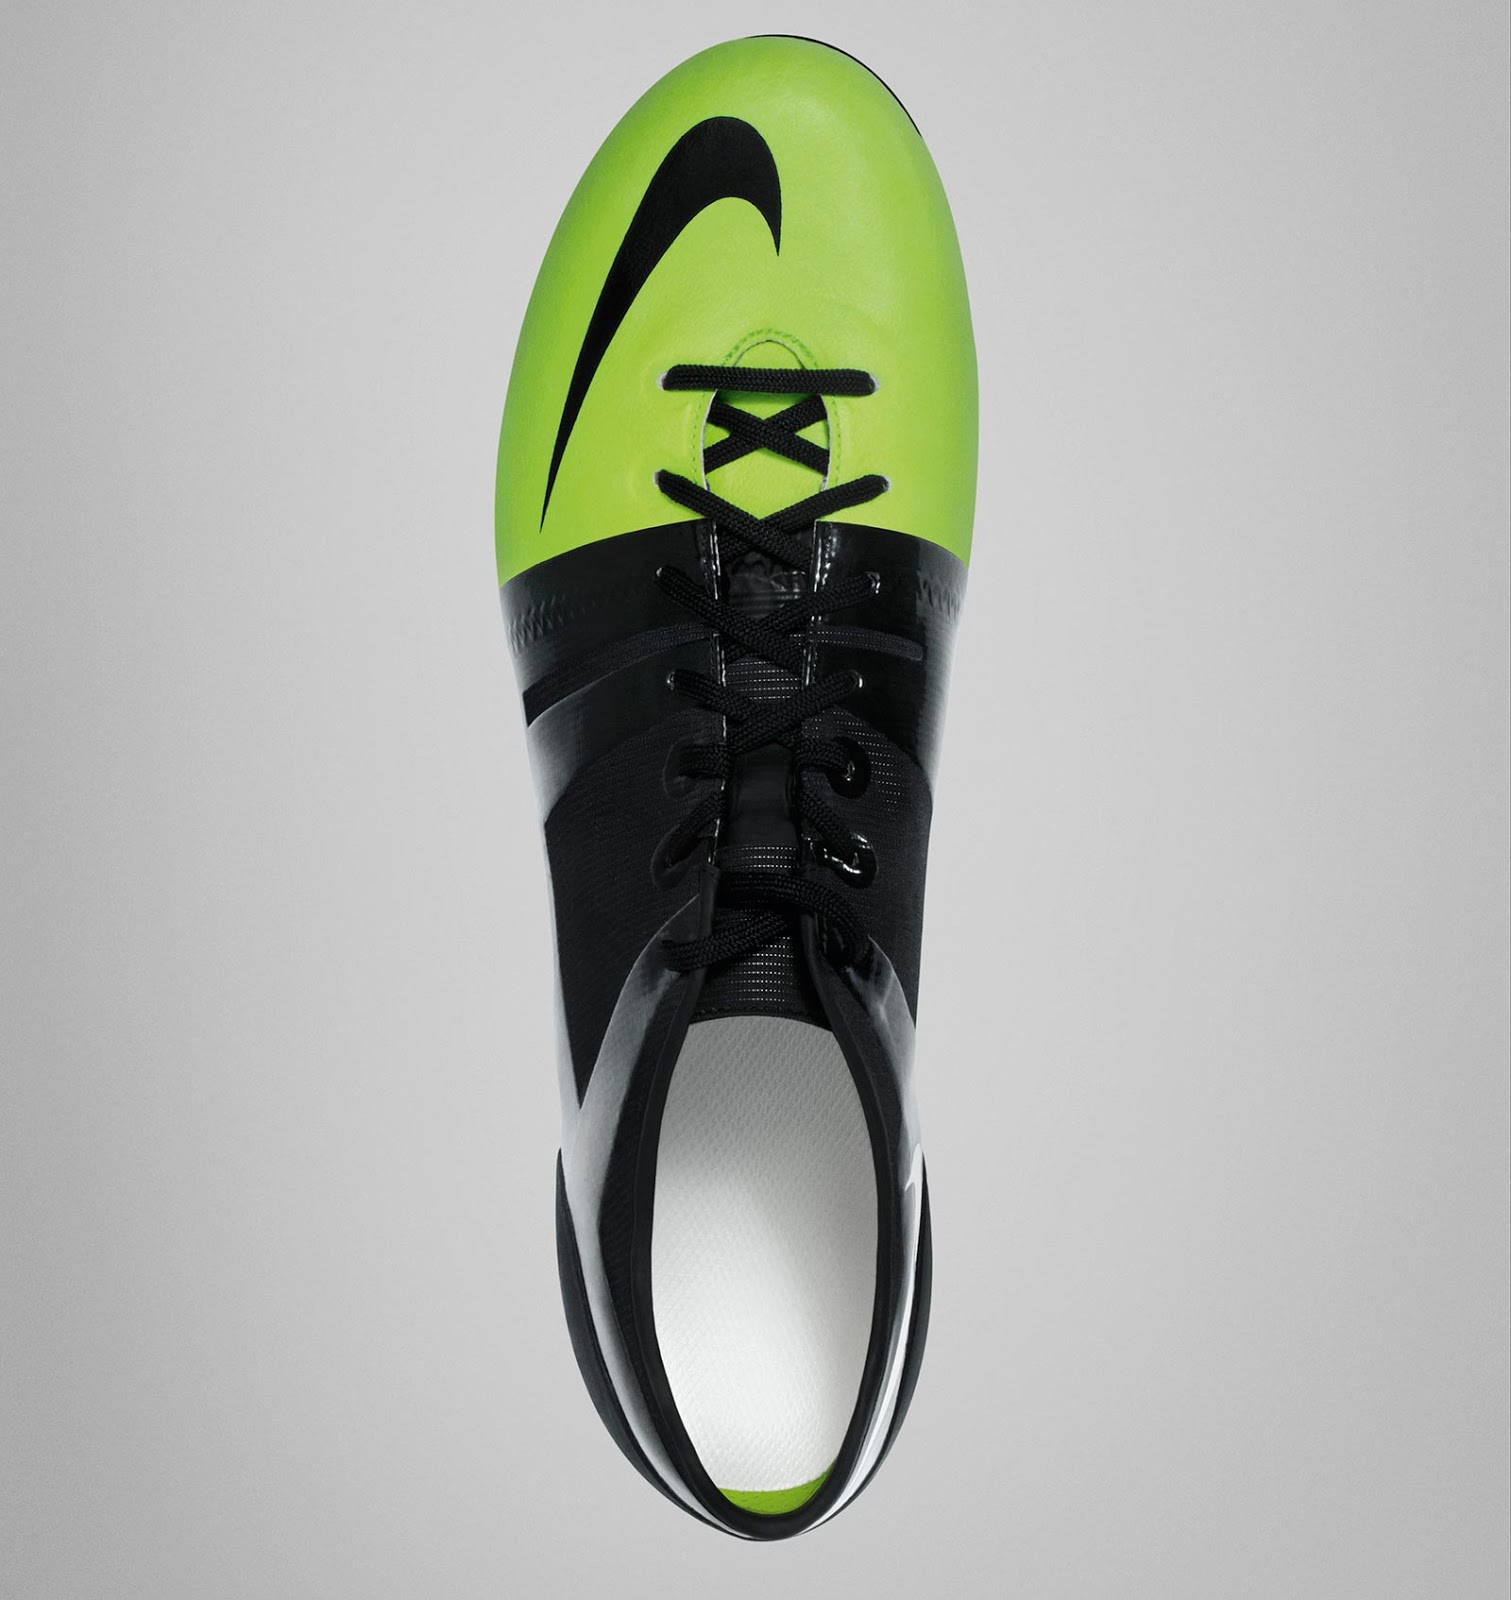 Nike GS 2012 Football Boots In Detail - Footy